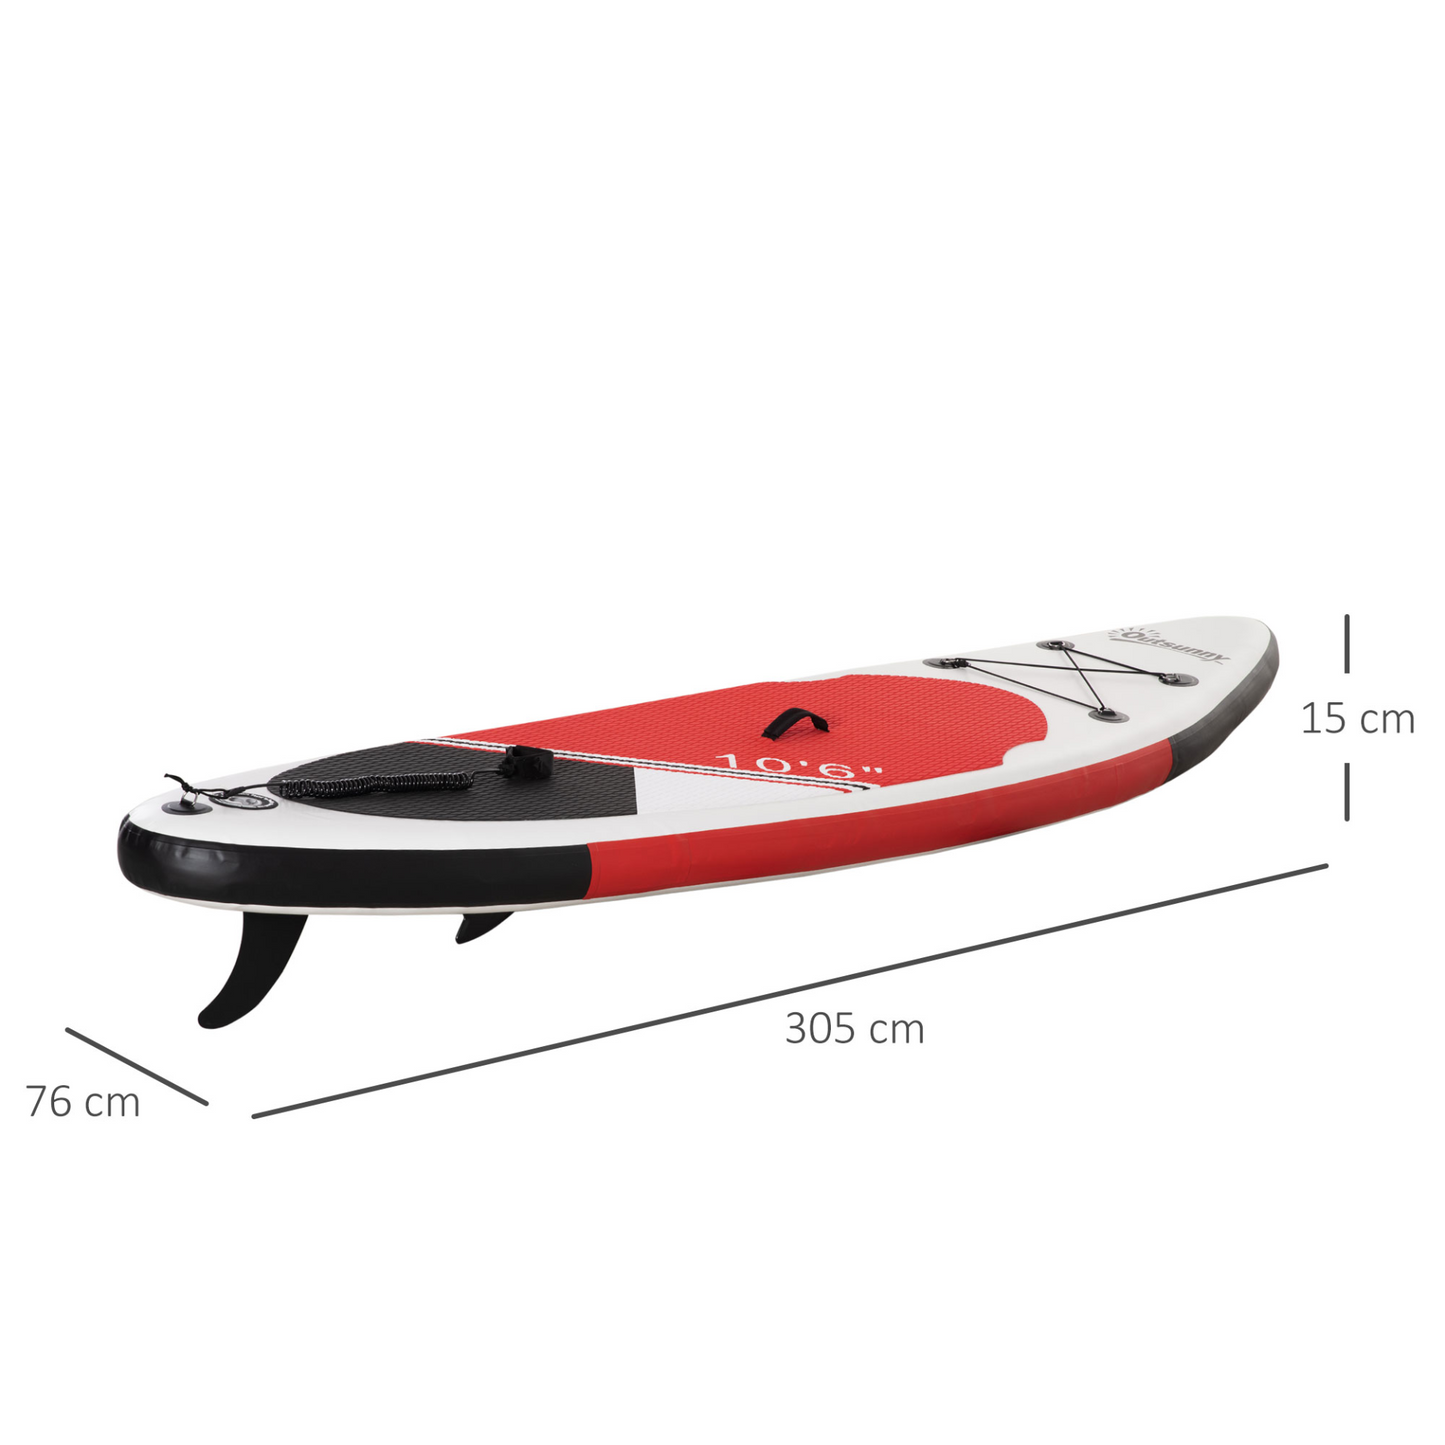 Outsunny 10' x 30" x 6" Inflatable Paddle Stand Up Board, Non-Slip Deck Board w/ Aluminium Paddle, ISUP Accessories, Carry Bag, 305L x 76W x 15Hcm - White